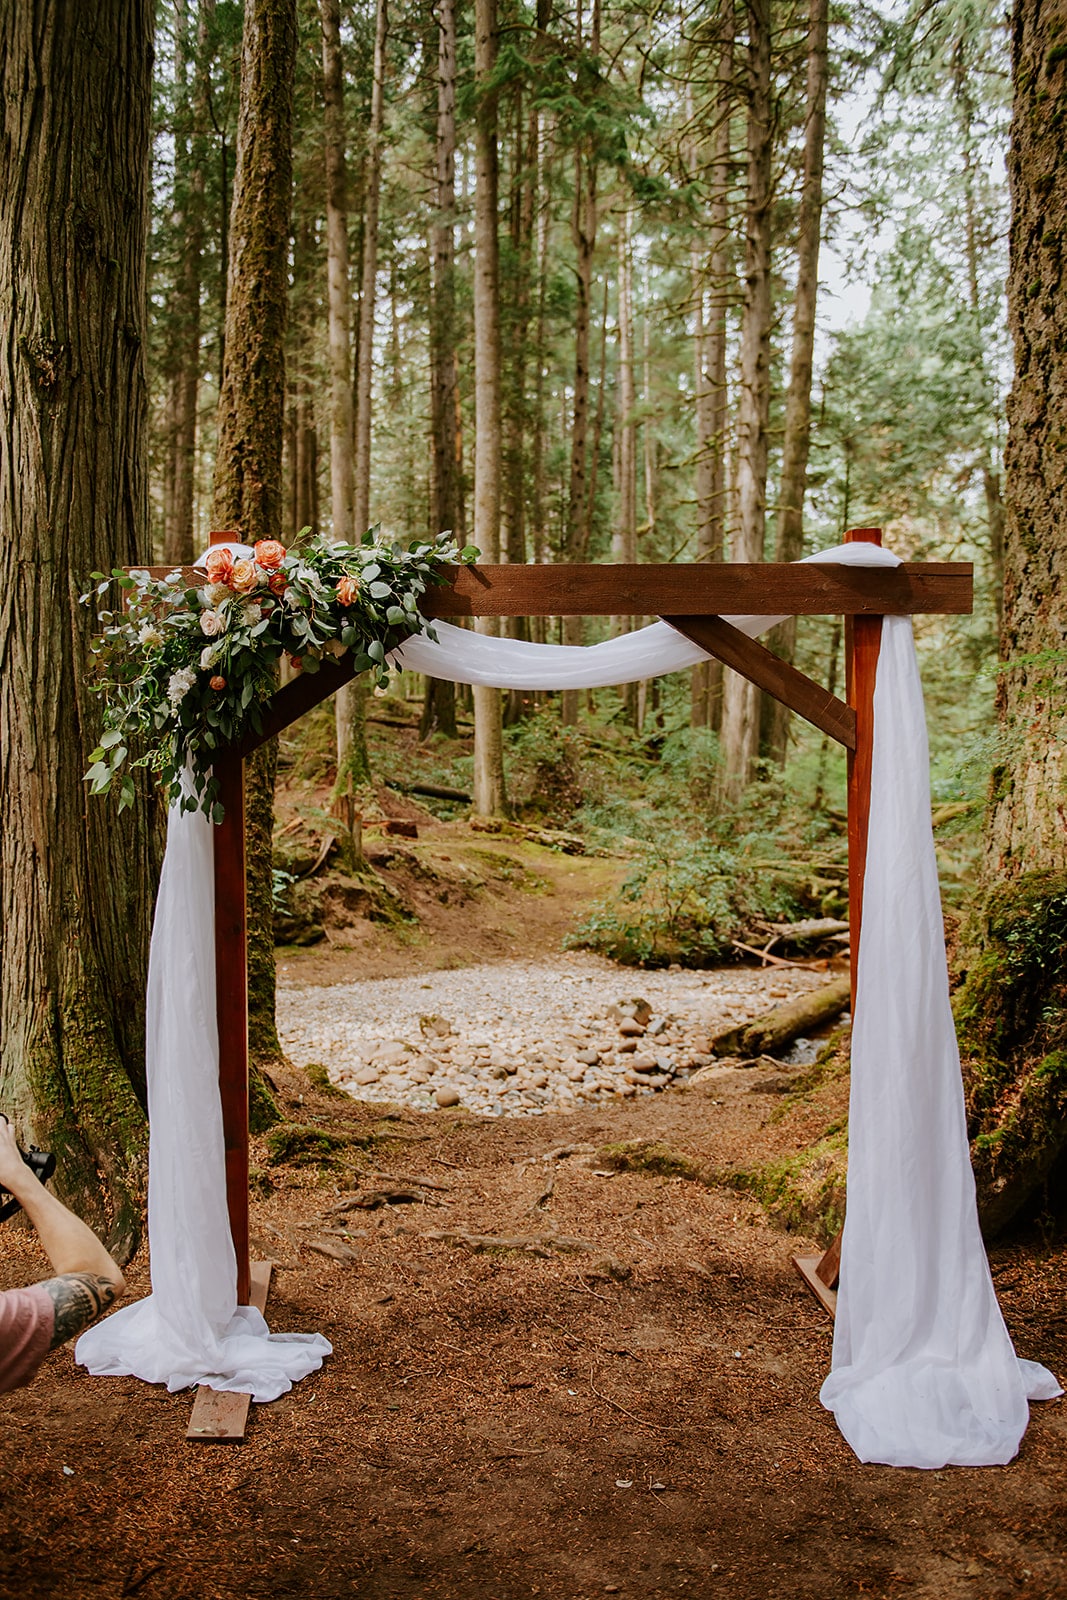 Wood wedding arch with flowers and drape